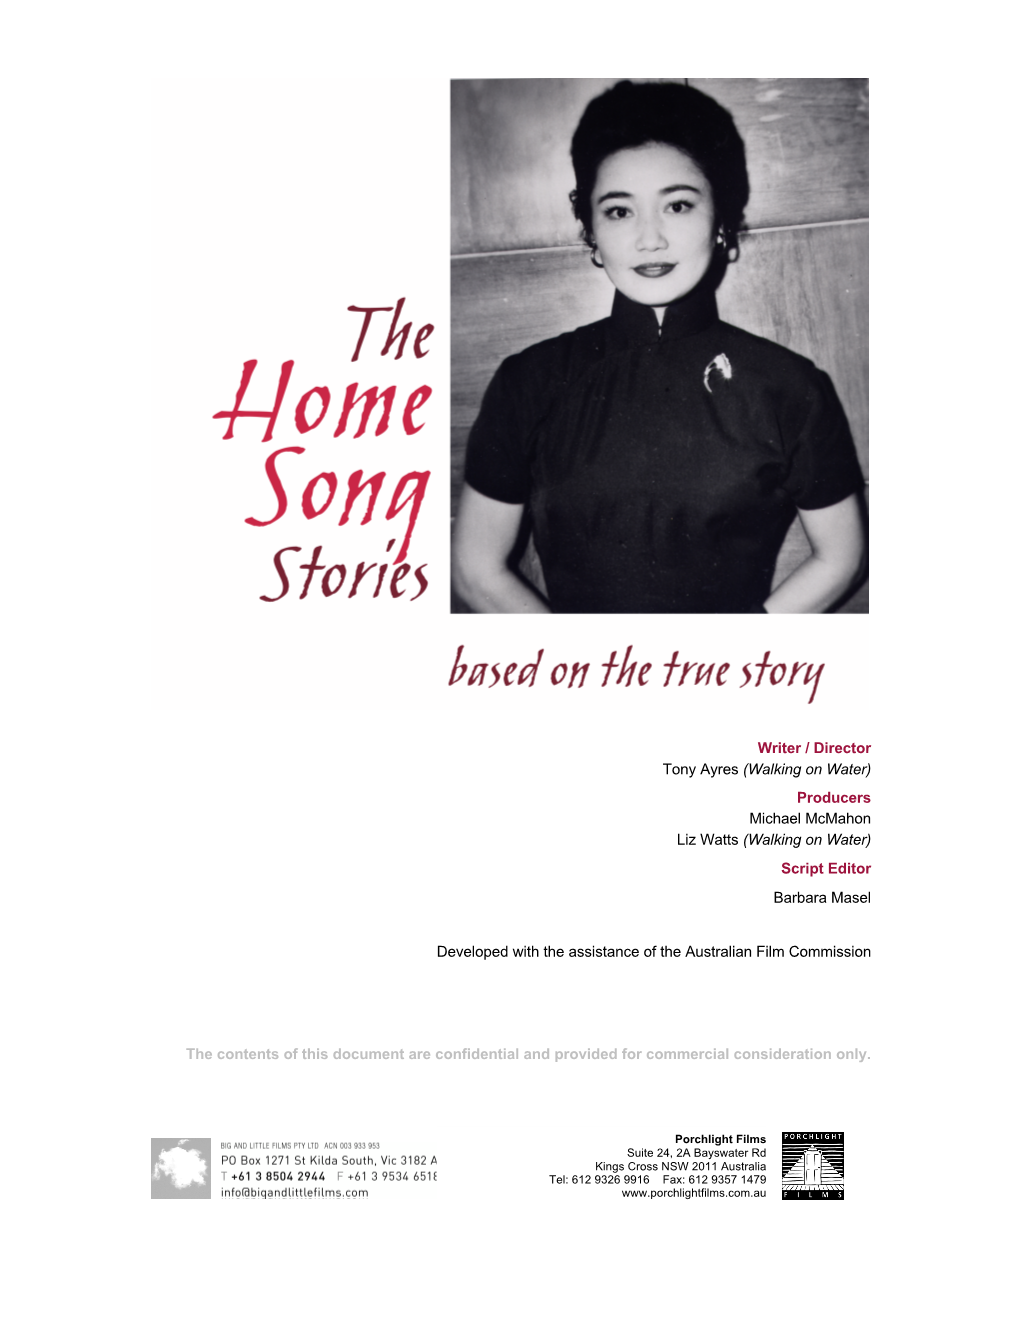 The Home Song Stories Written by Tony Ayres